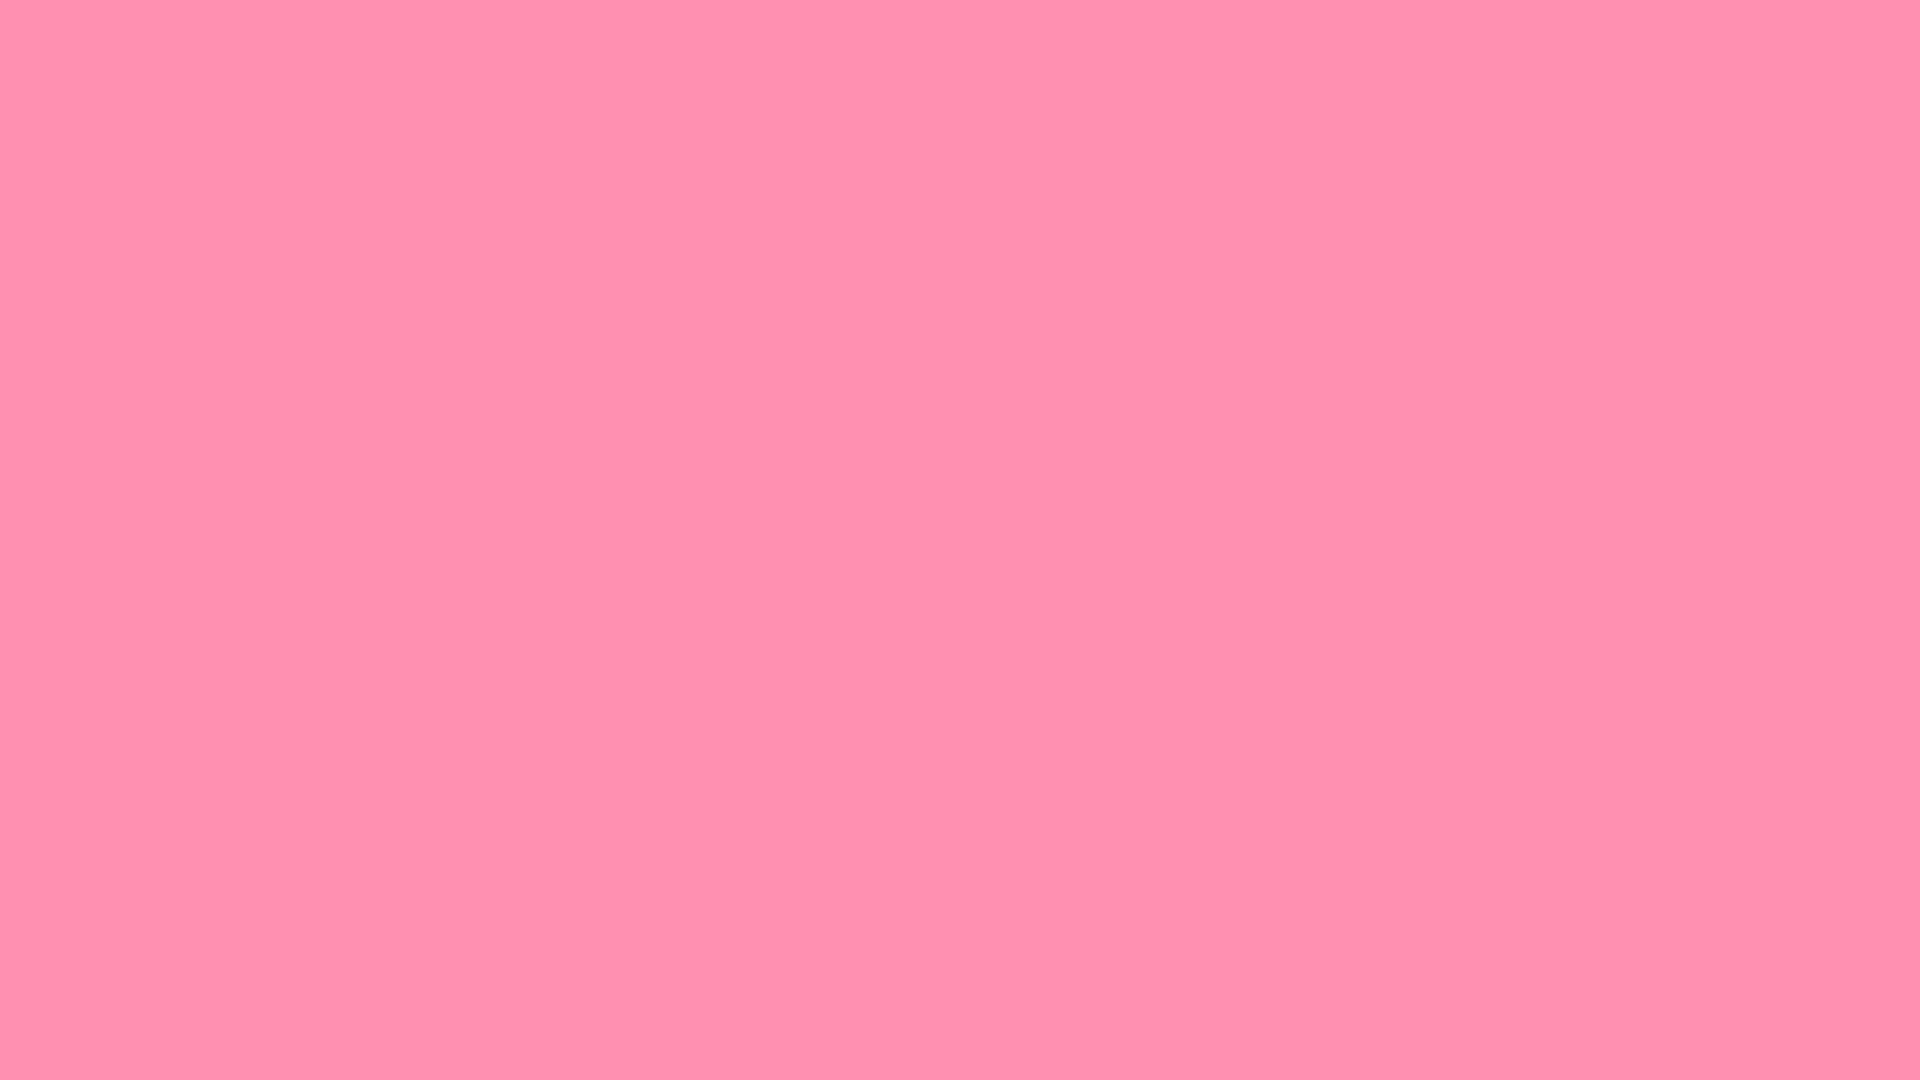 Cotton Candy Pink Solid Color Wallpaper